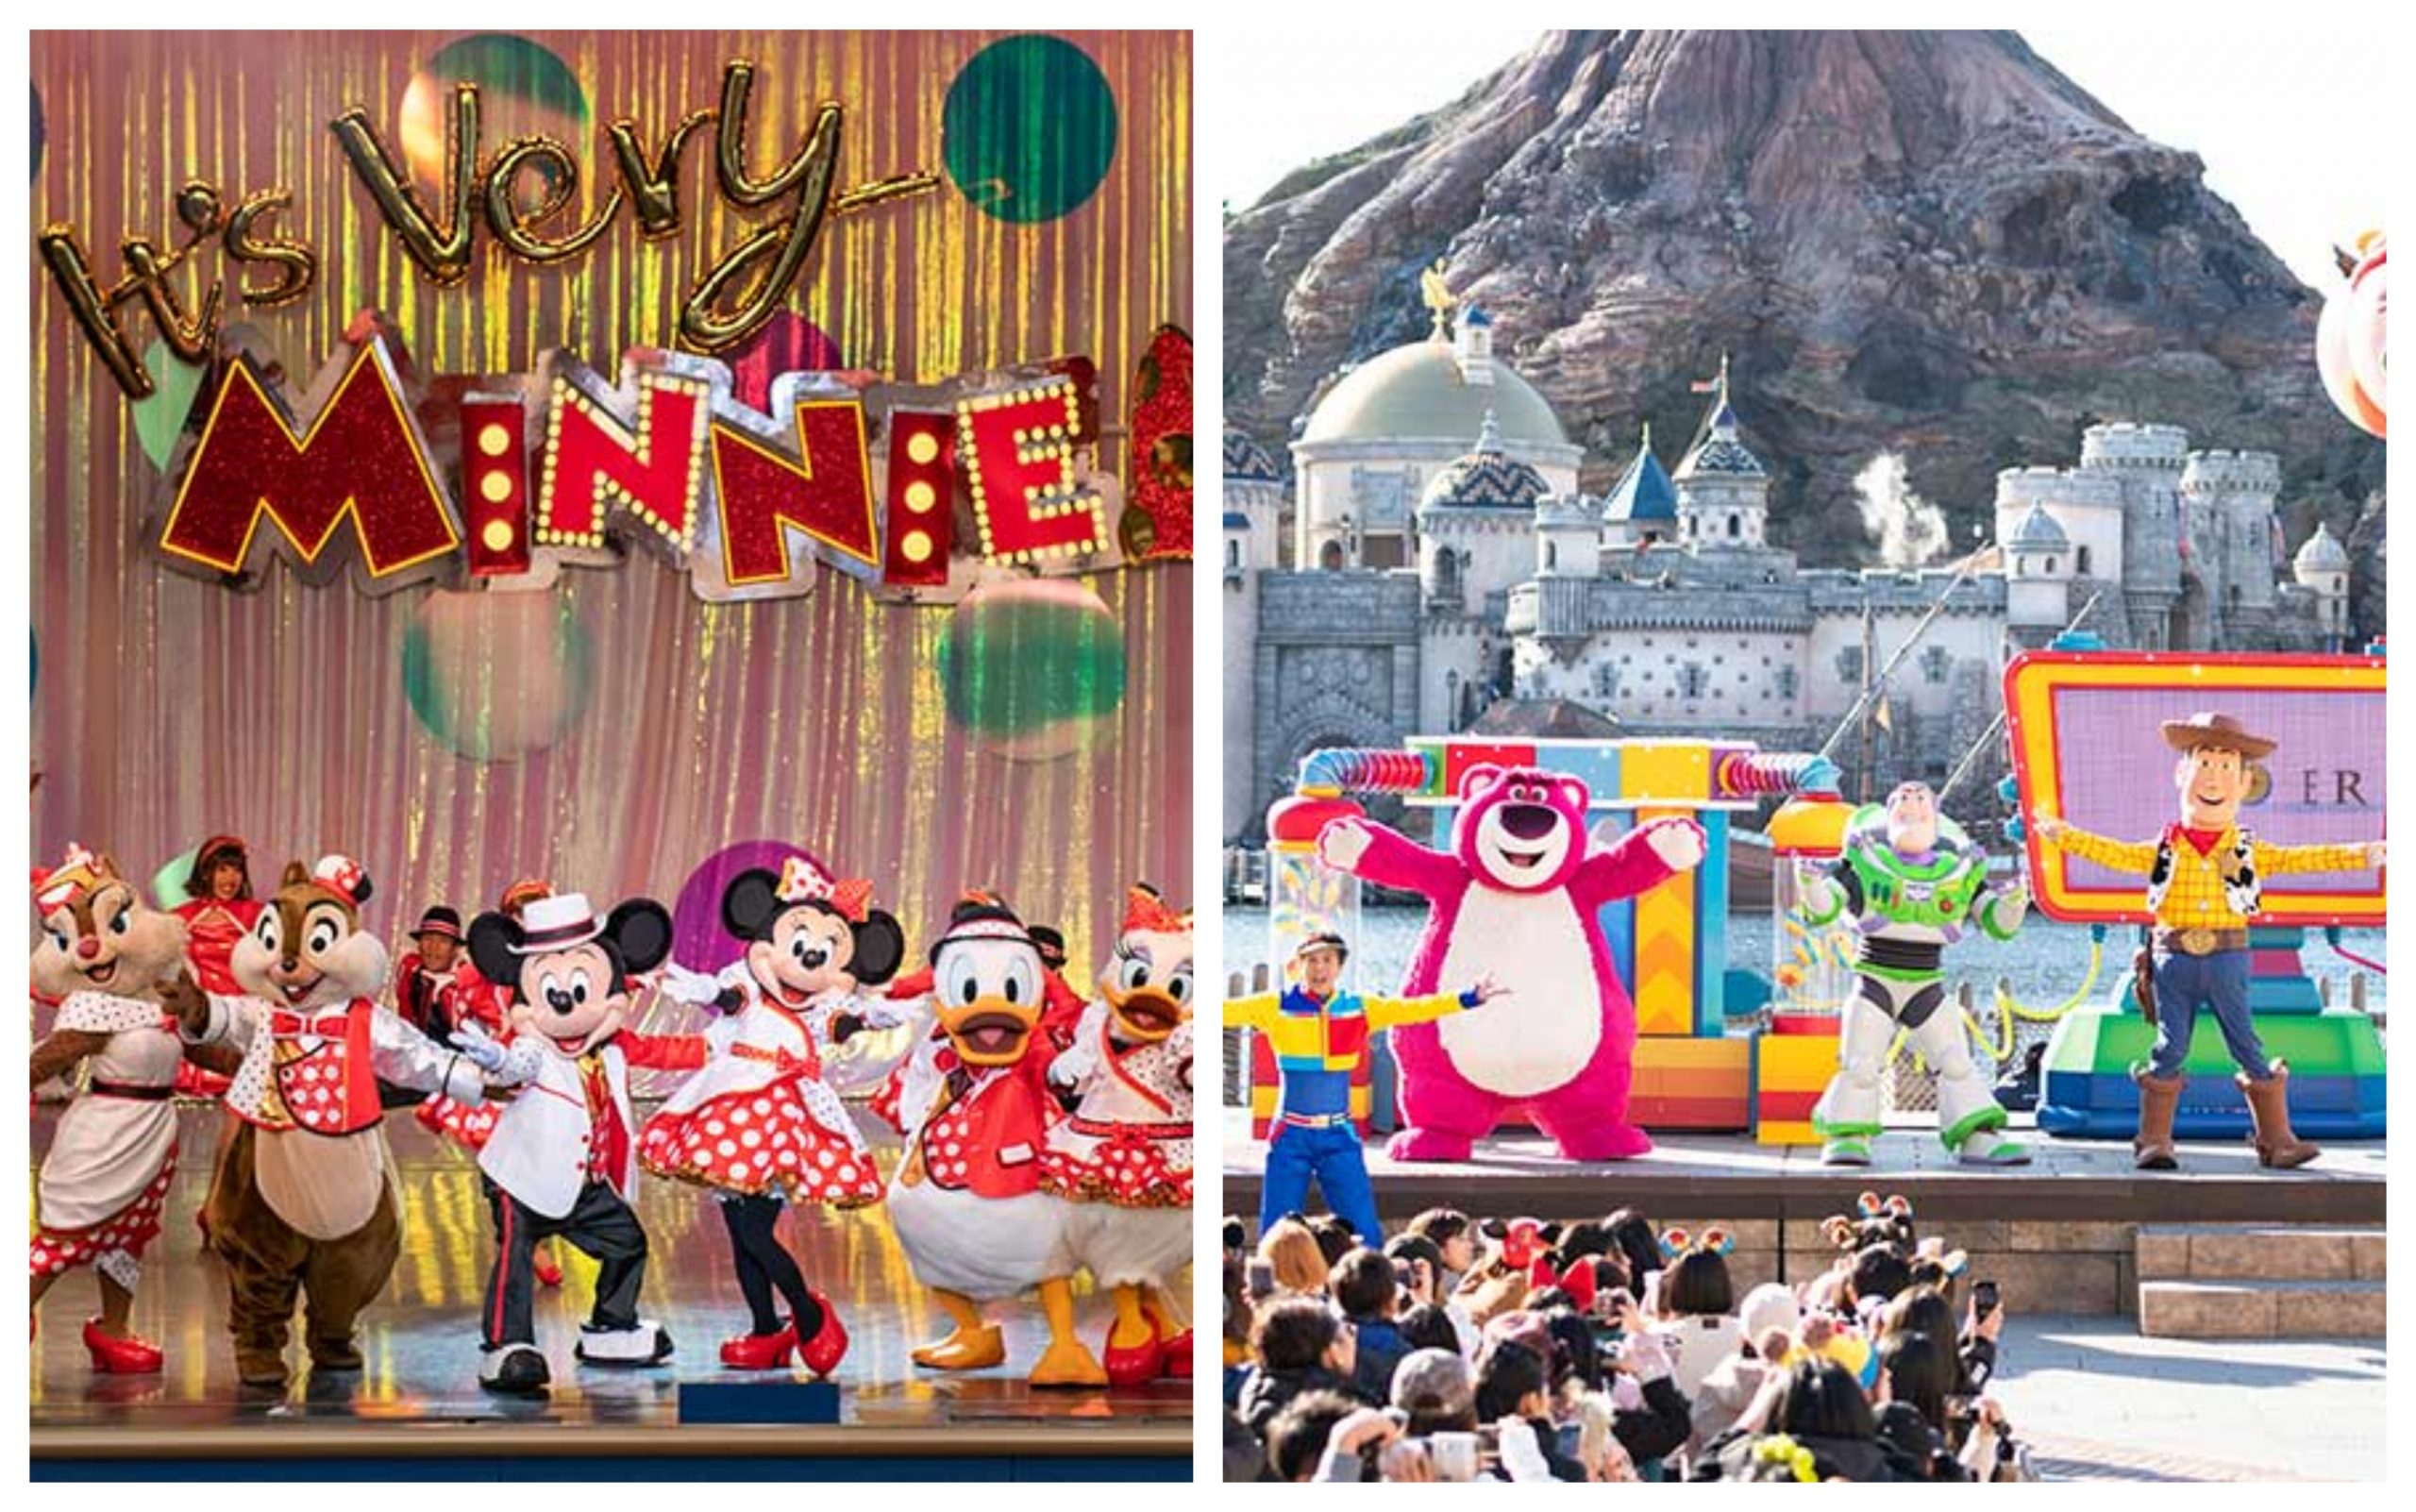 Watch Disney Parks Performances Online While You Are Stuck in Quarantine!